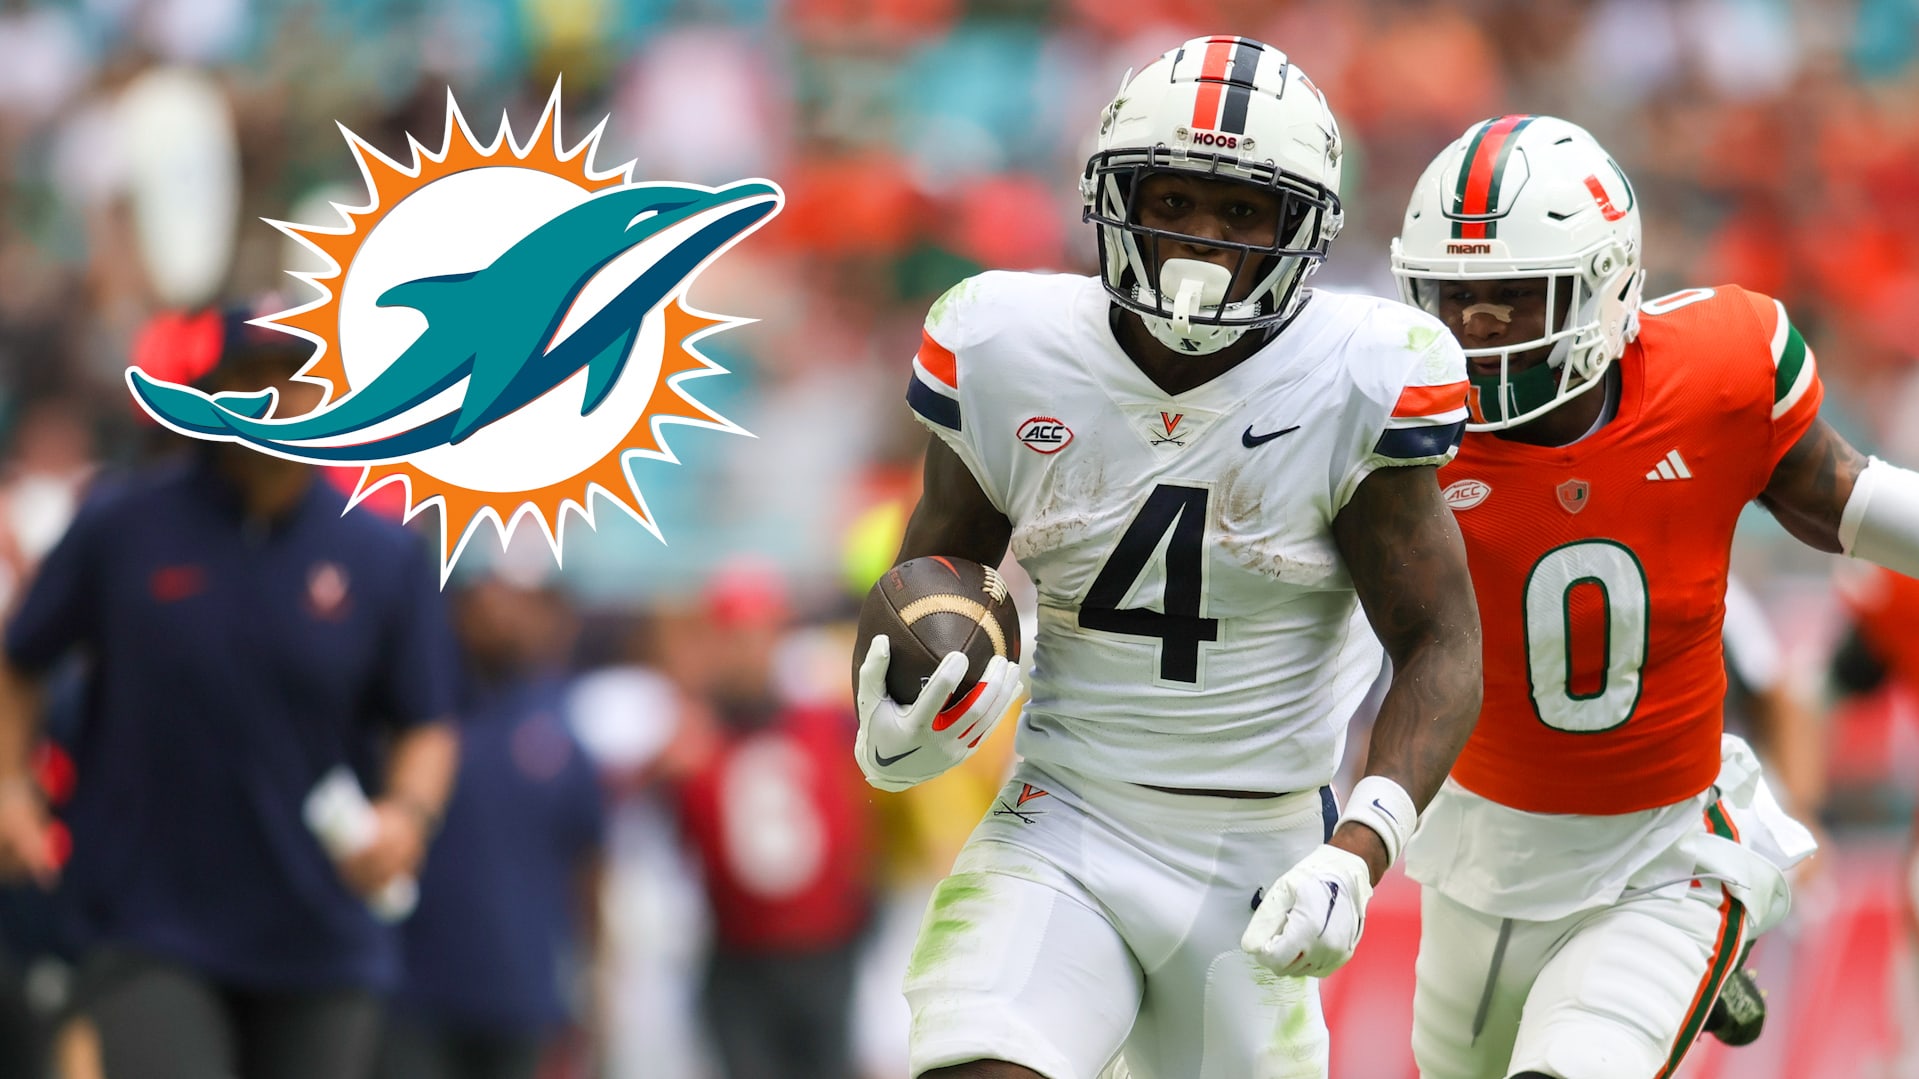 Virginia WR Malik Washington Selected by Miami Dolphins in 6th Round of NFL Draft